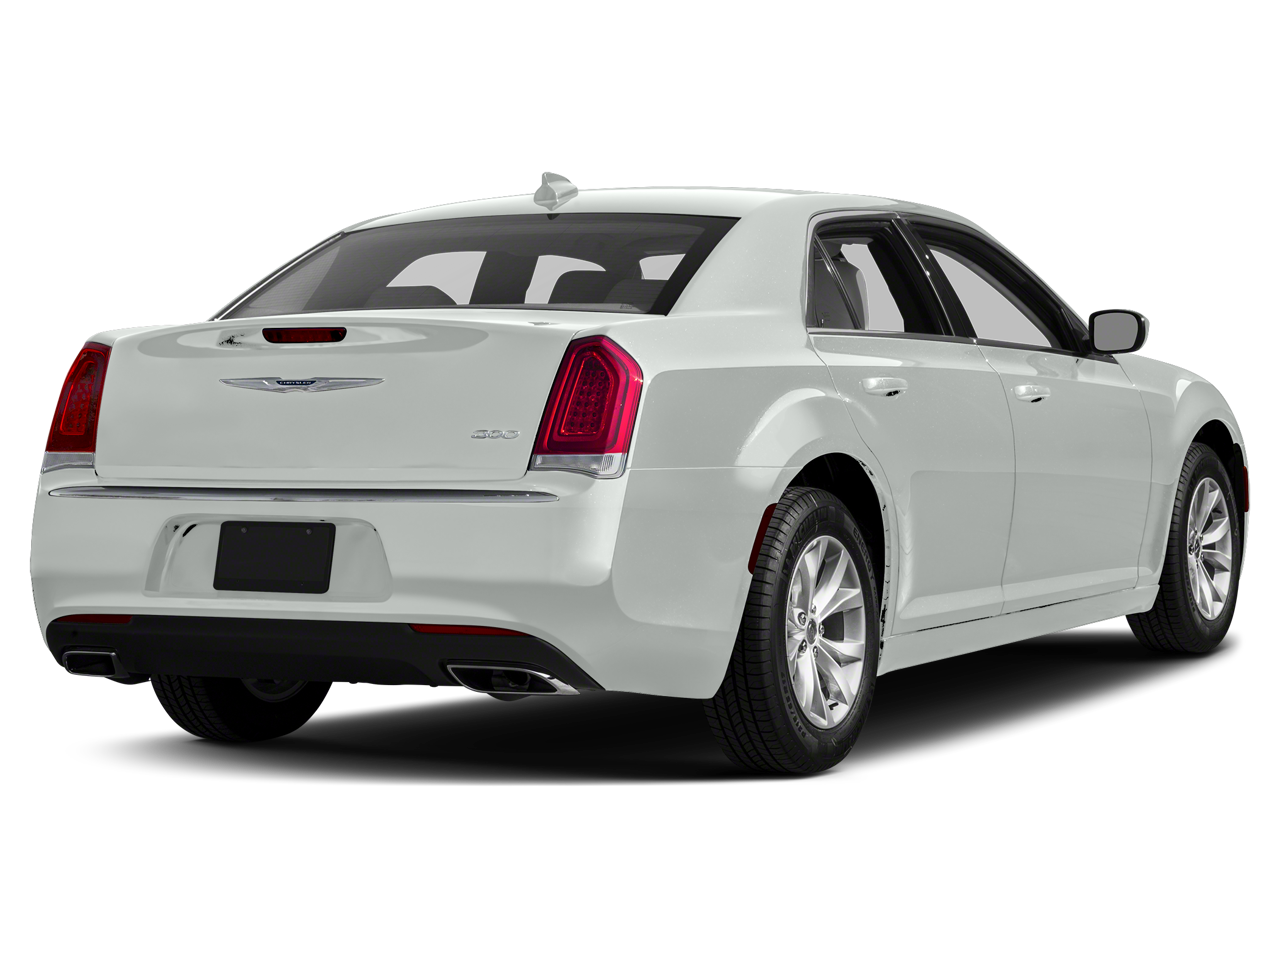 Used 2015 Chrysler 300 Limited with VIN 2C3CCAAG3FH930702 for sale in Waipahu, HI